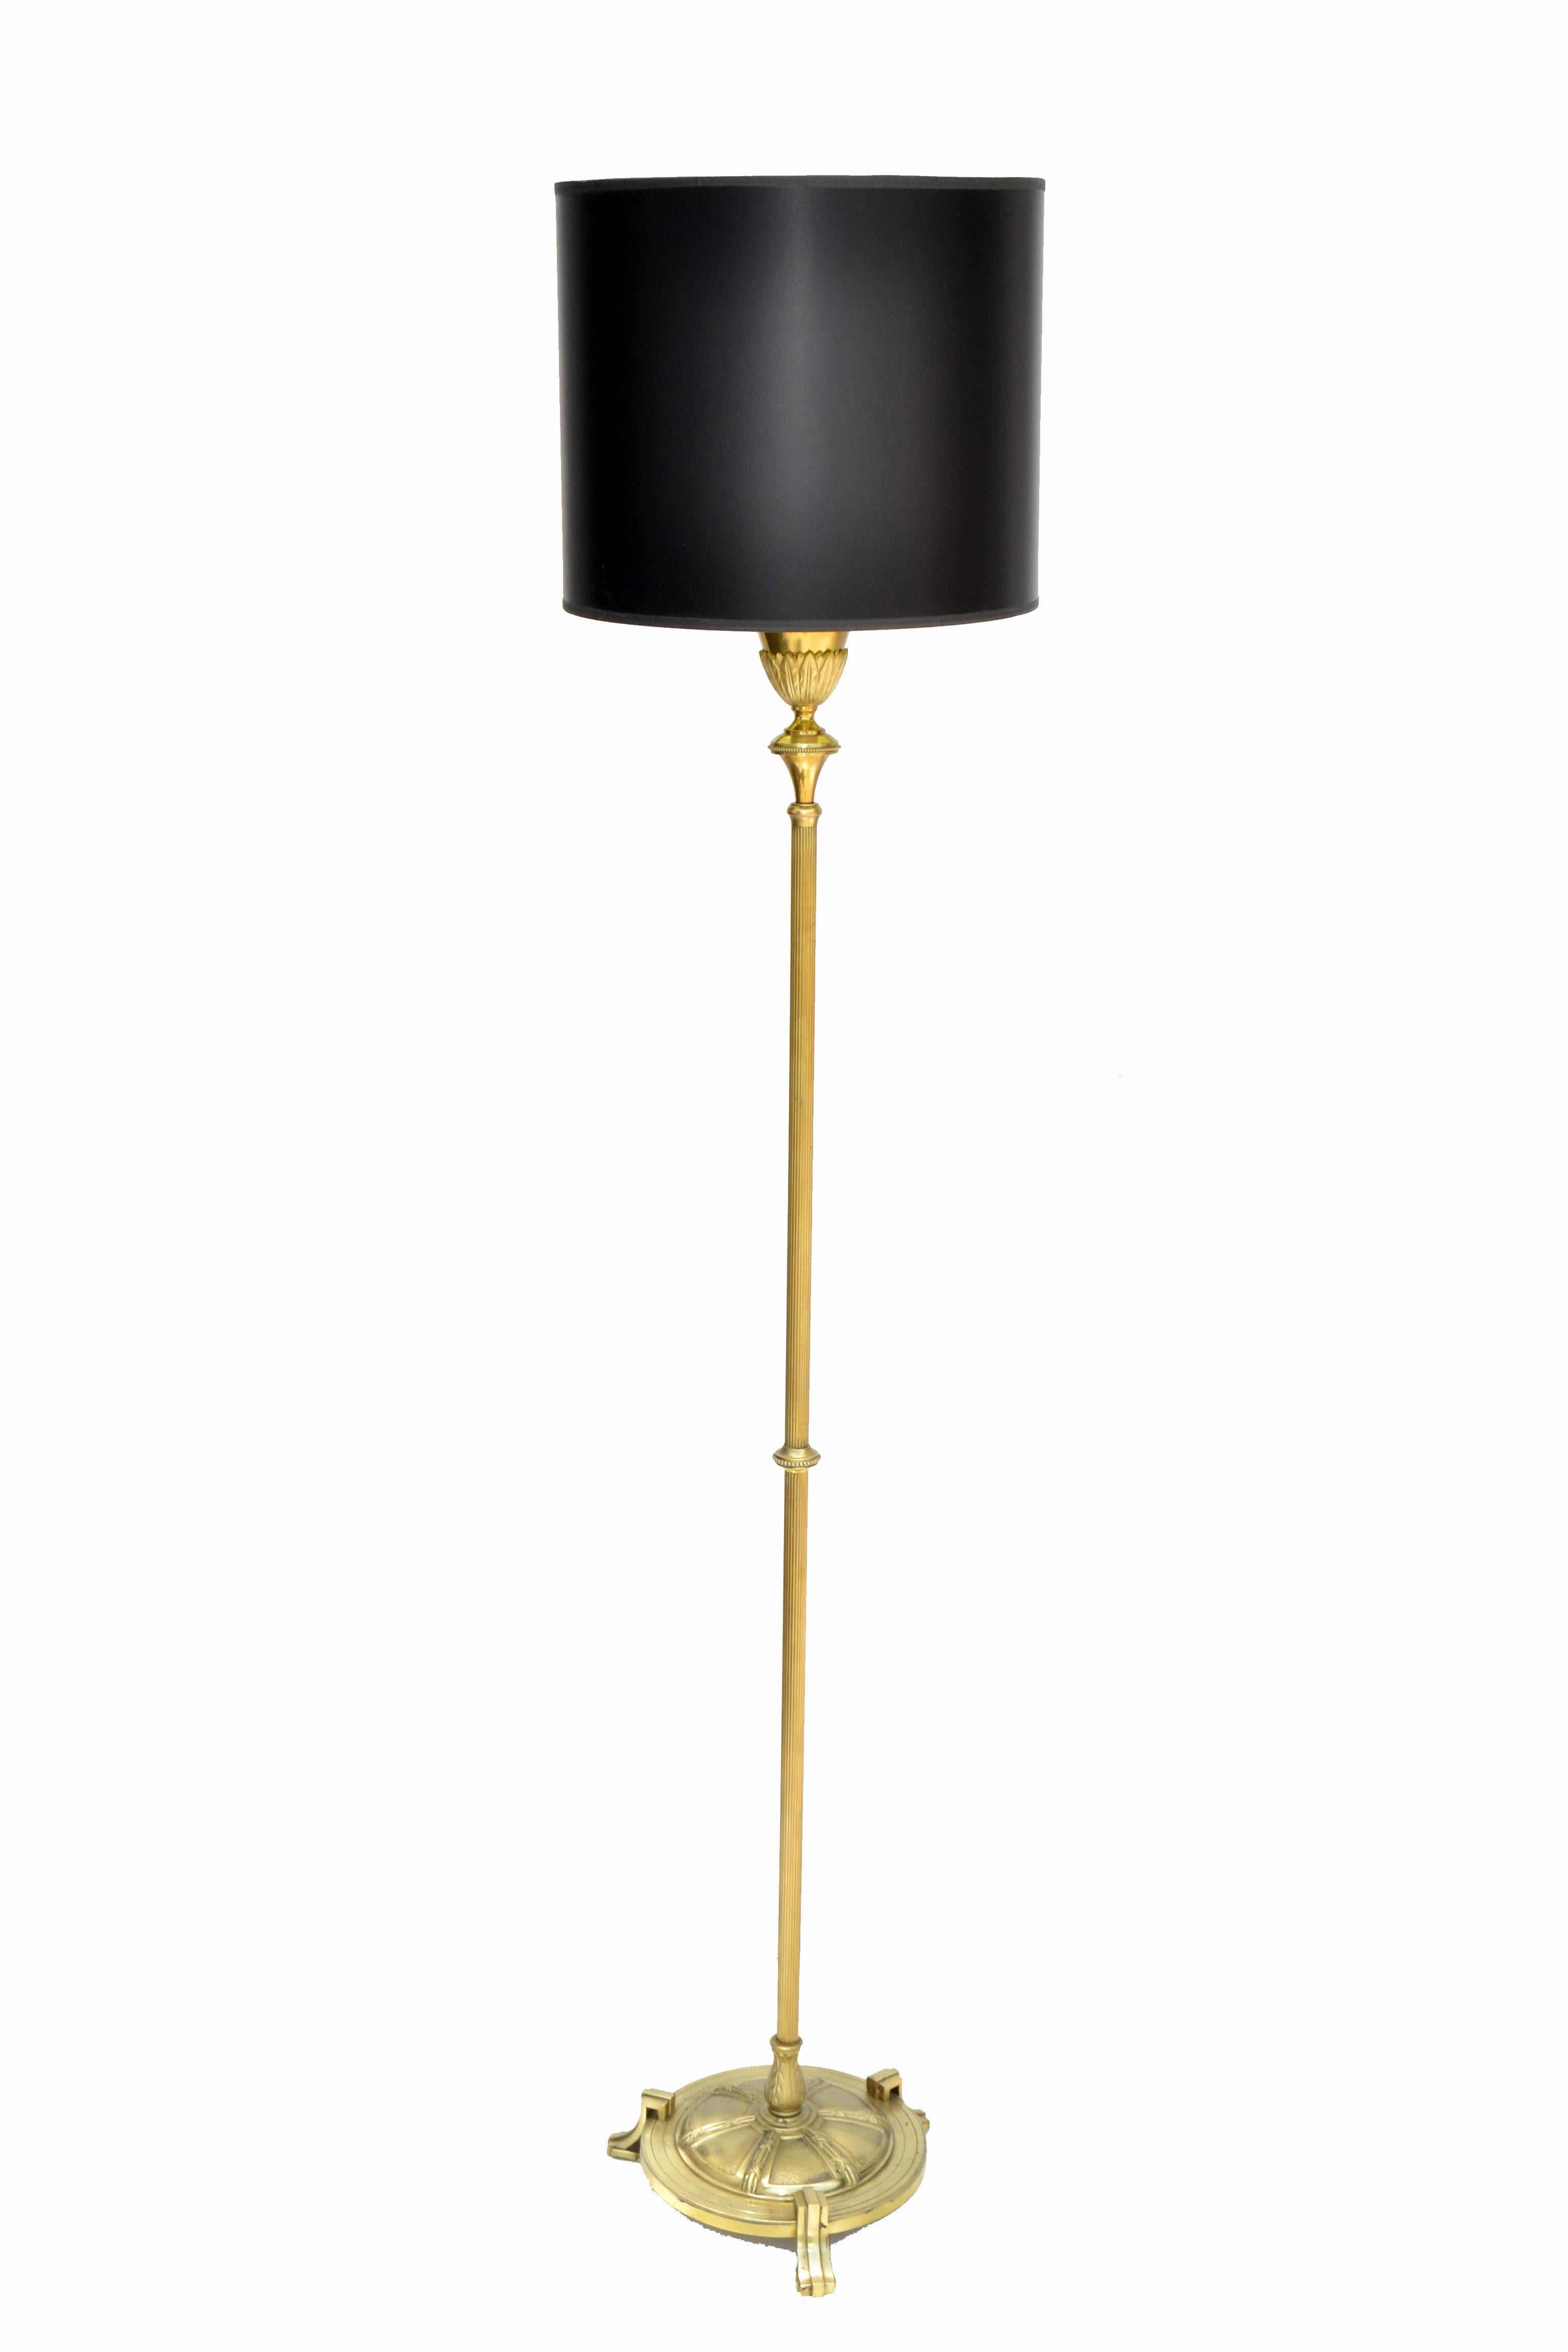 Maison Baguès French Neoclassical Bronze & Brass Round Base Floor Lamp, 1940s For Sale 6